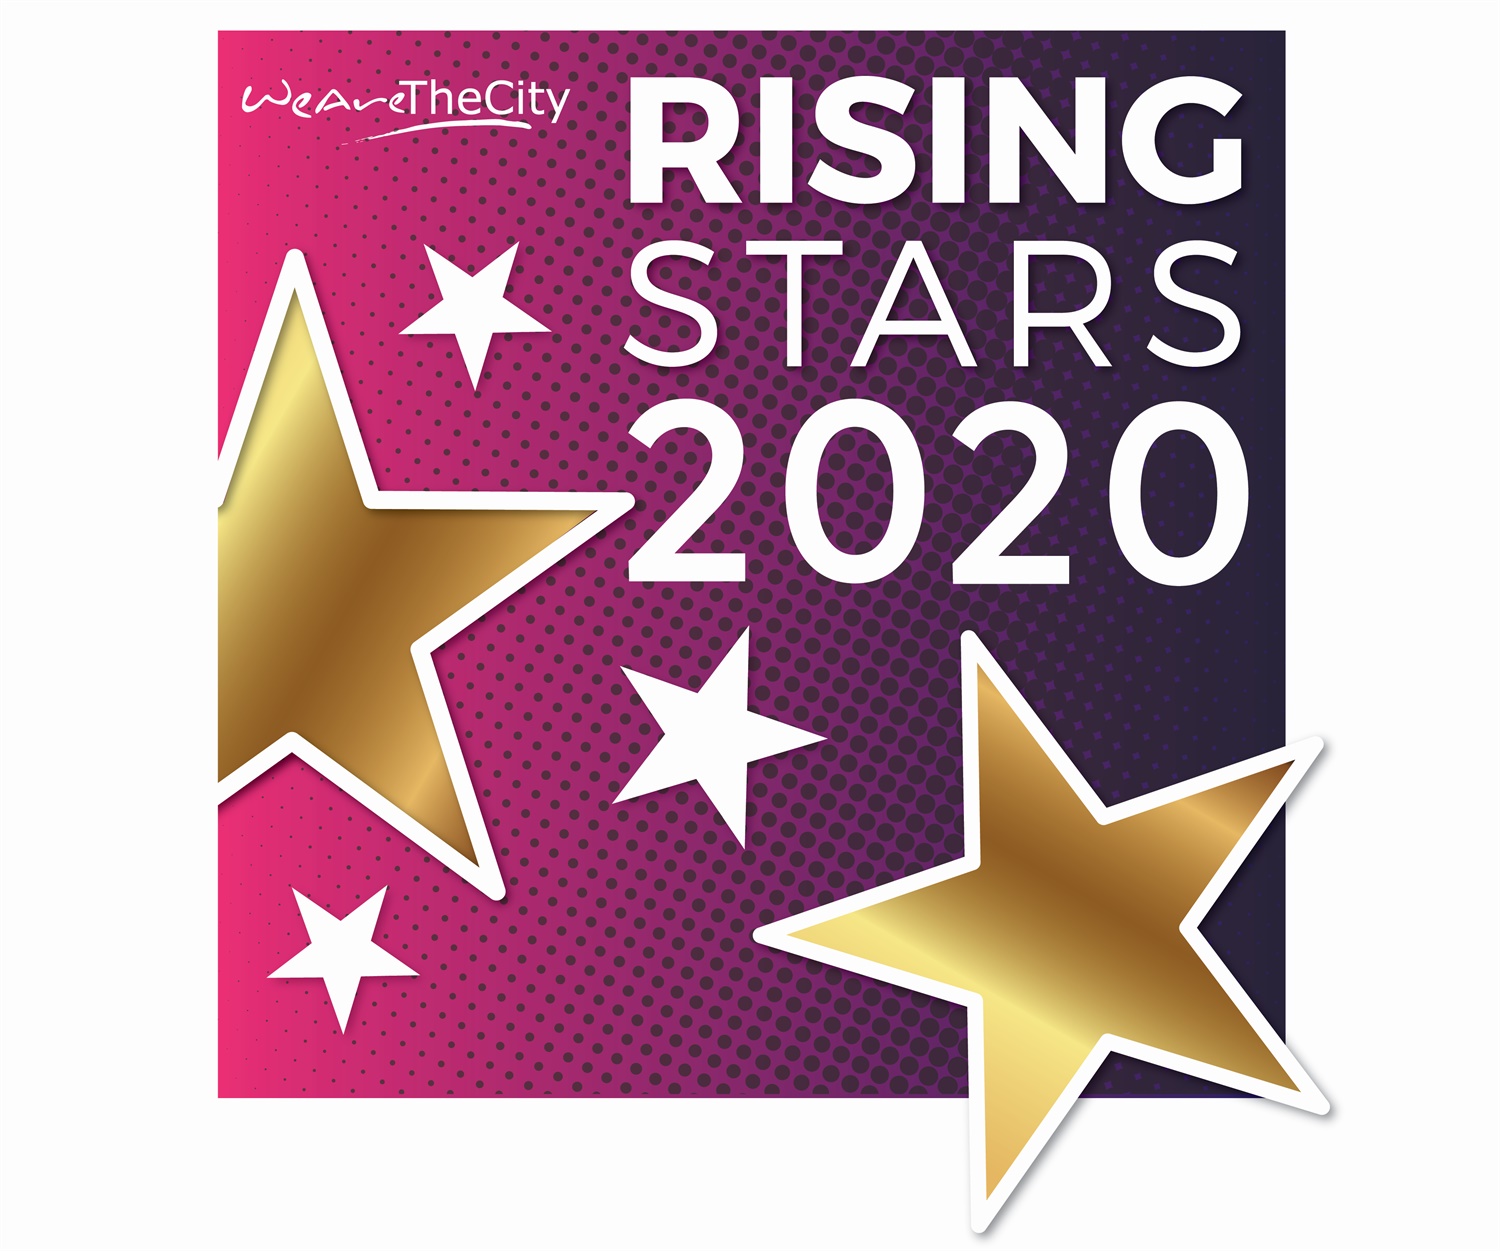 RTM proud supporters of WeAreTheCity Rising Stars Awards 2020 